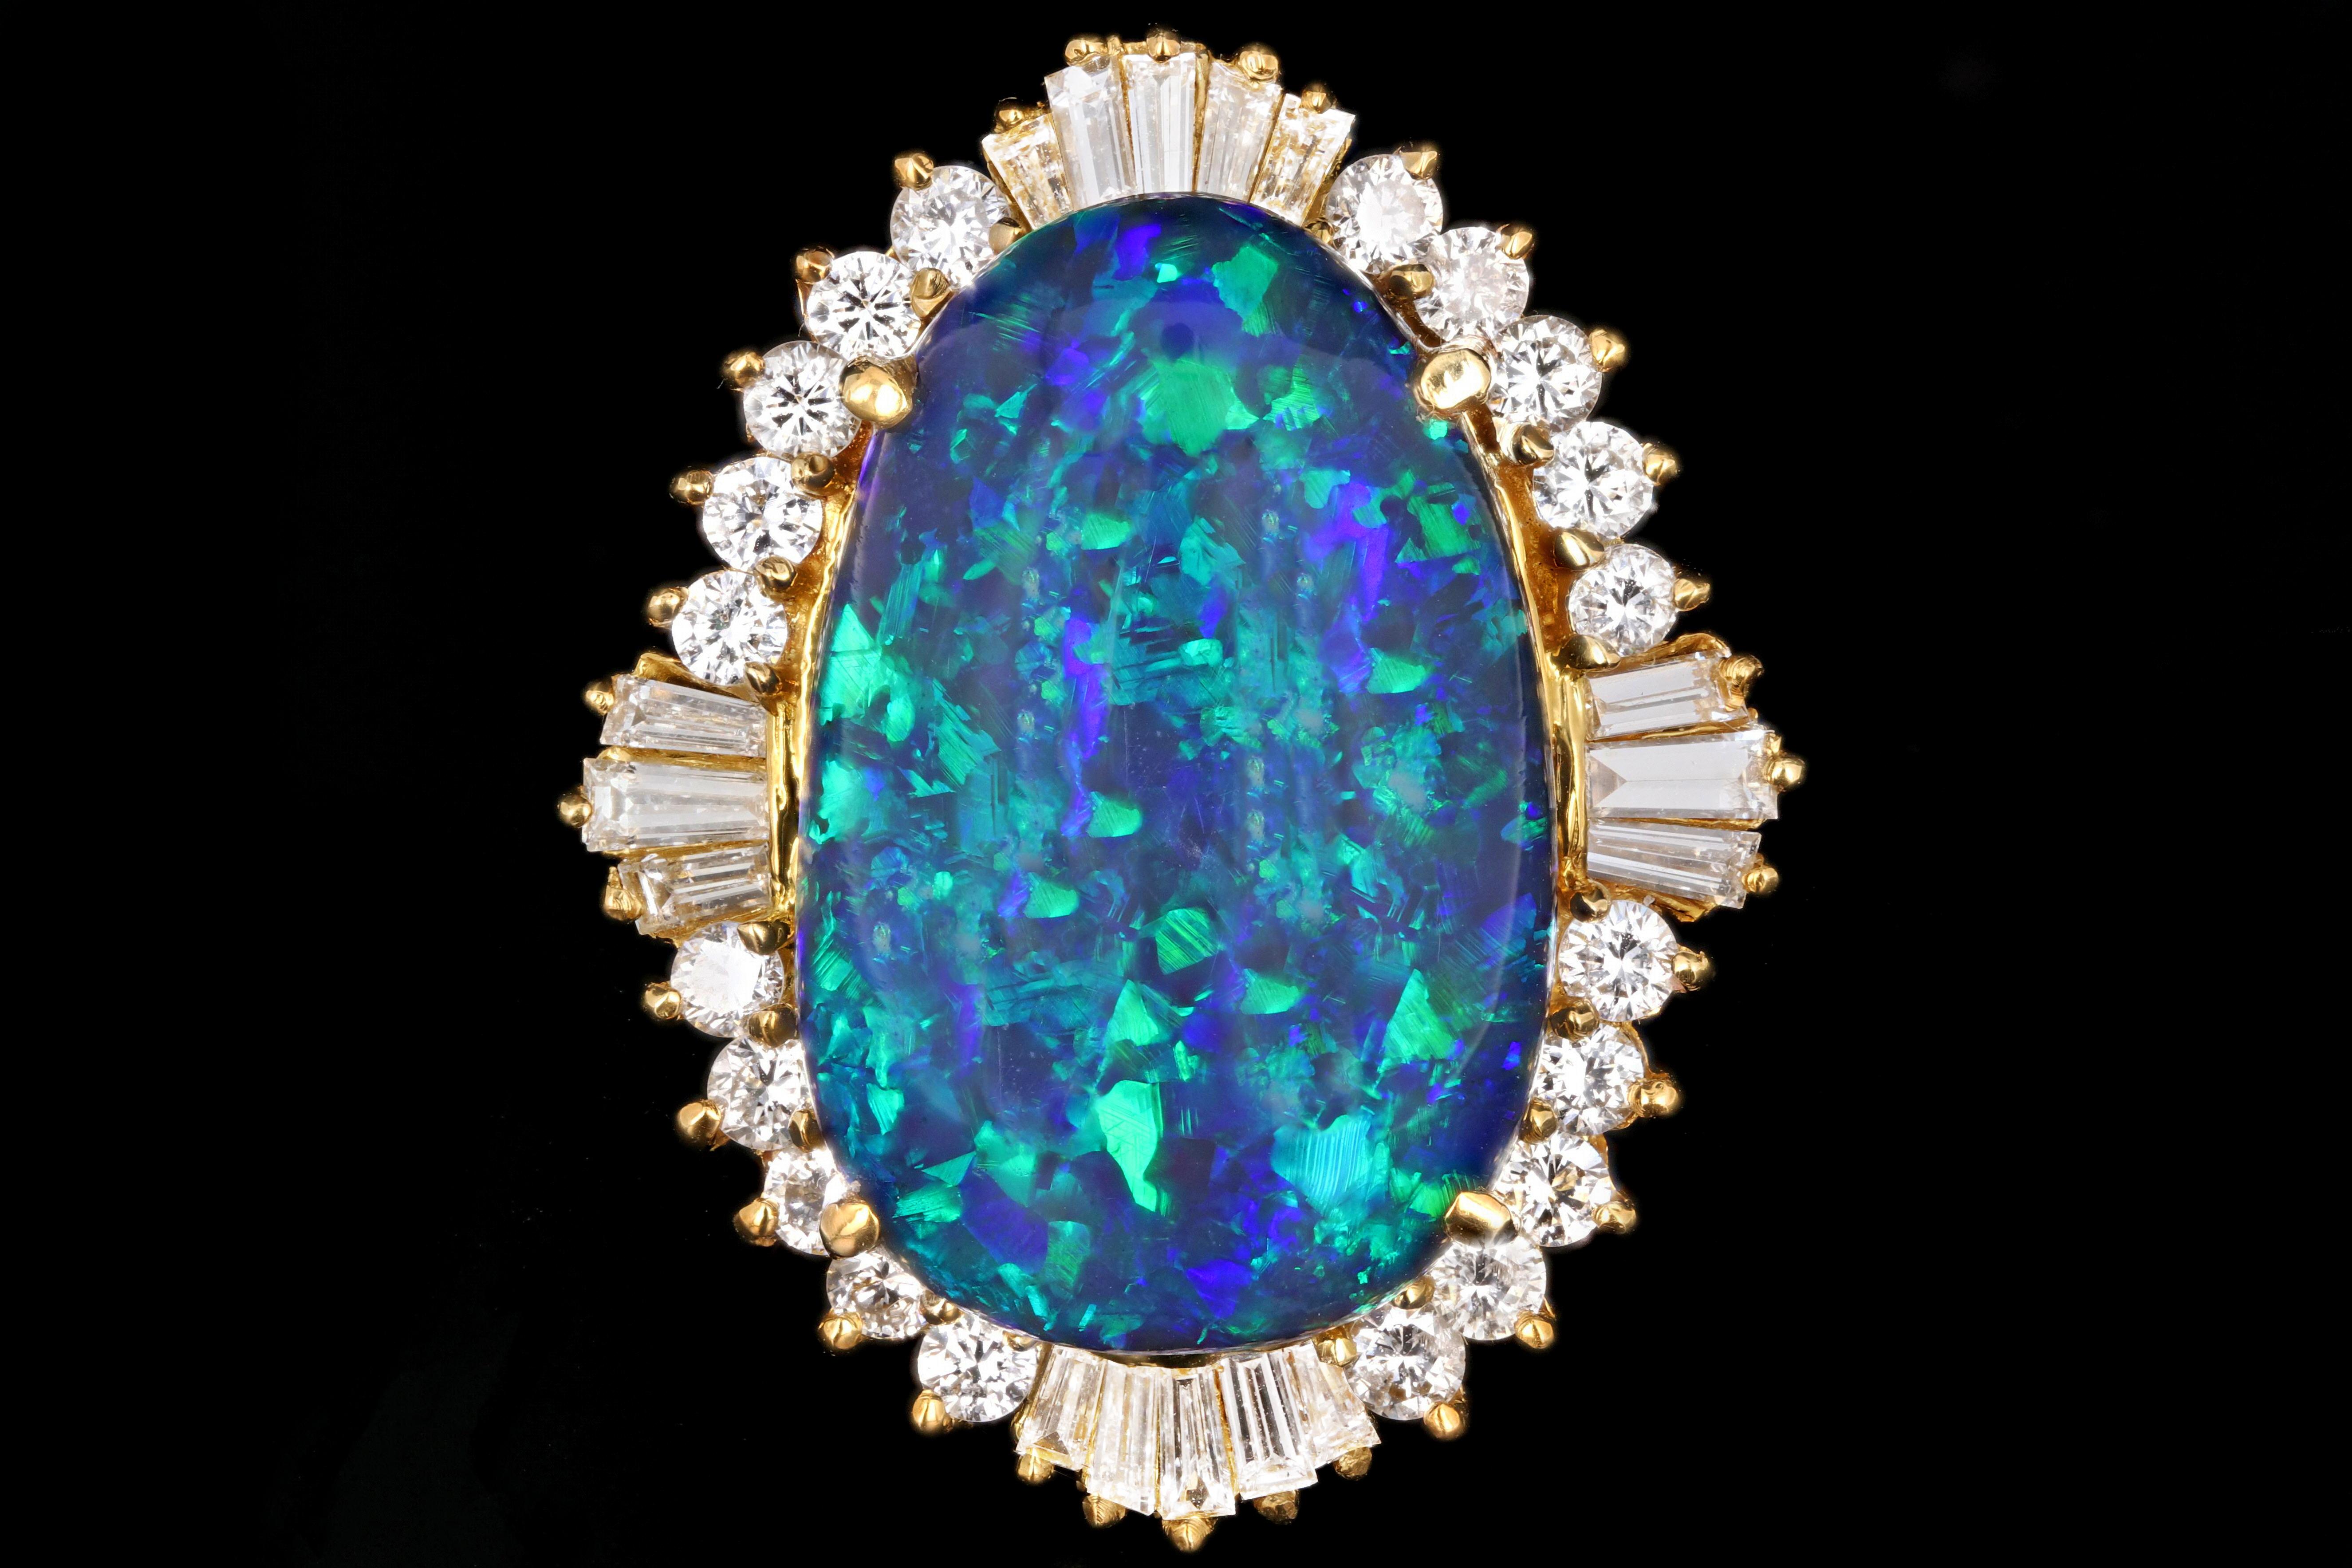 Era: Modern

Composition: 18K Yellow Gold

Primary Stone: Black Opal

Carat Weight: 20 Carats

Accent Stone: Baguette and Round Brilliant Cut Diamonds

Carat Weight: 2 Carats

Color: F-G

Clarity: Vs1/2

Total Carat Weight: 22 Carats

Ring Weight: